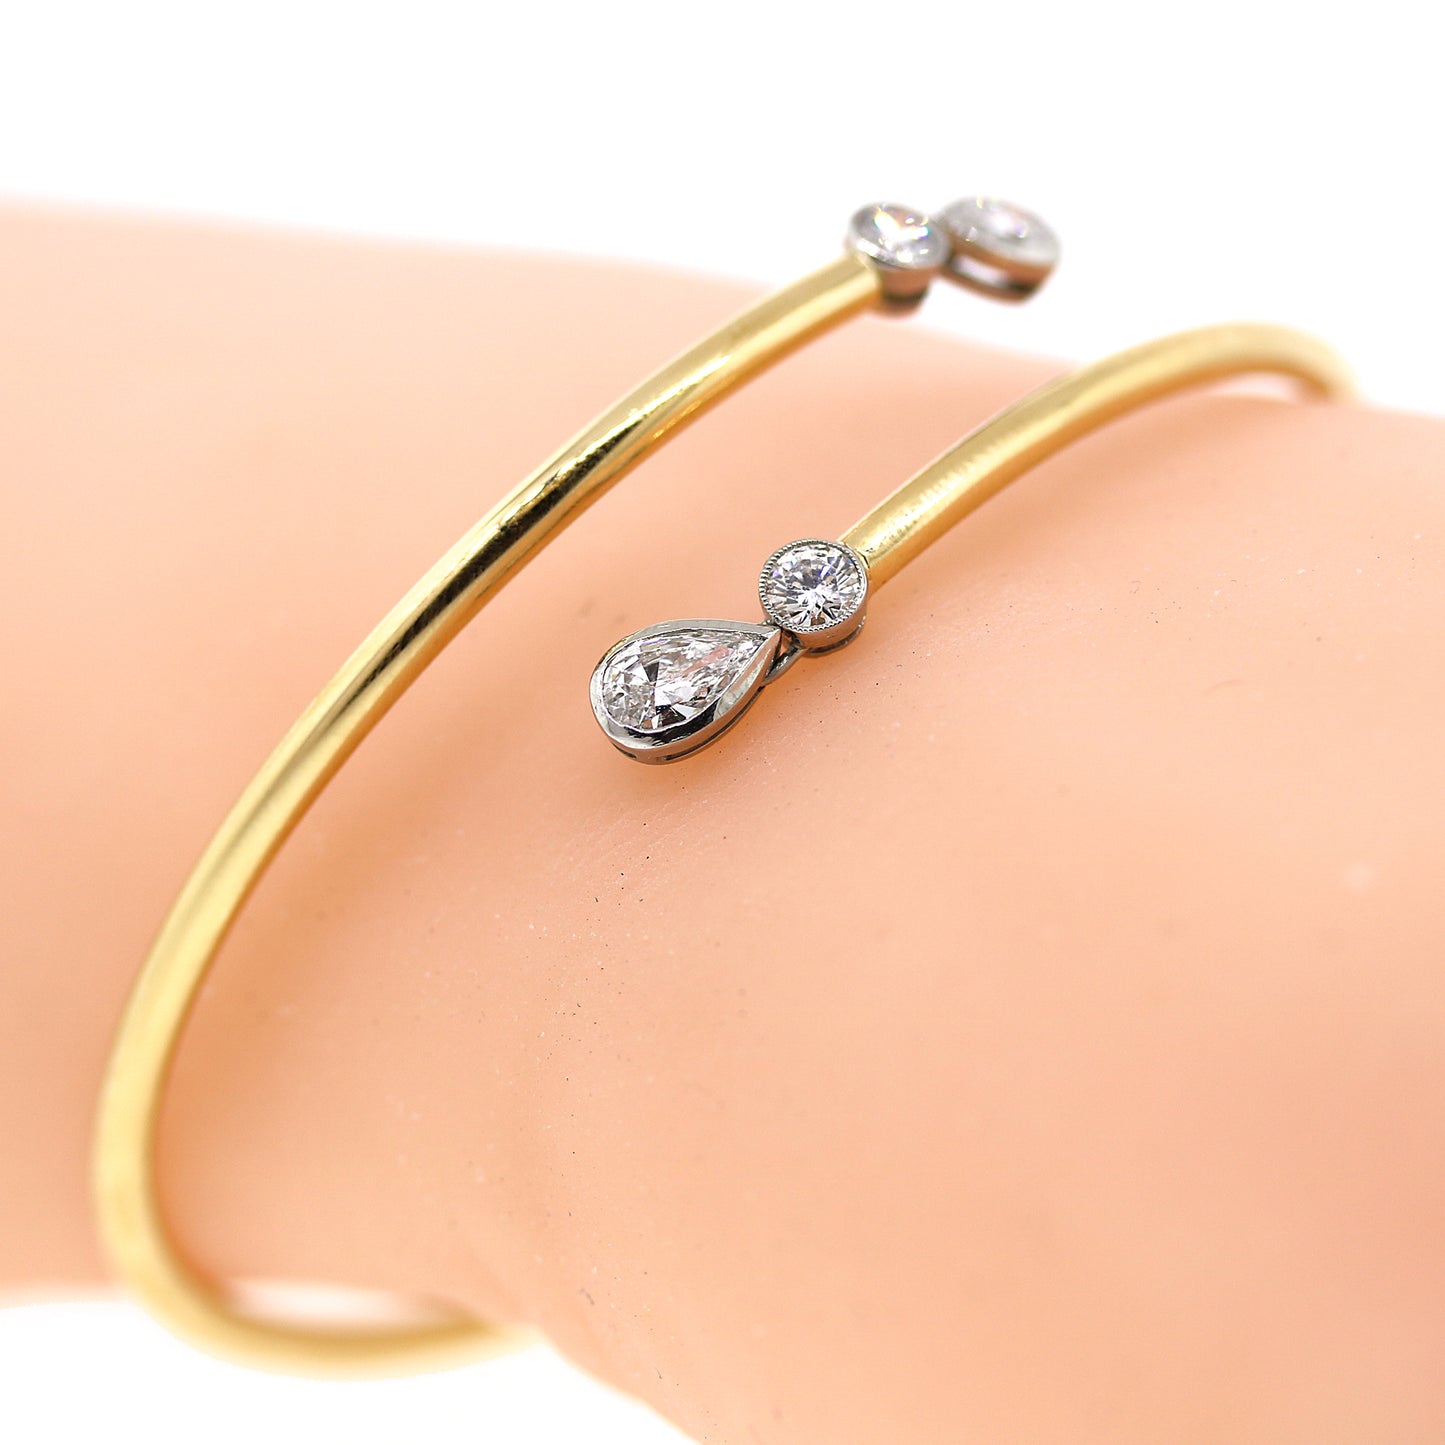 Load image into Gallery viewer, Charming 18k Yellow Gold and Platinum Diamond Slip-on Bracelet
